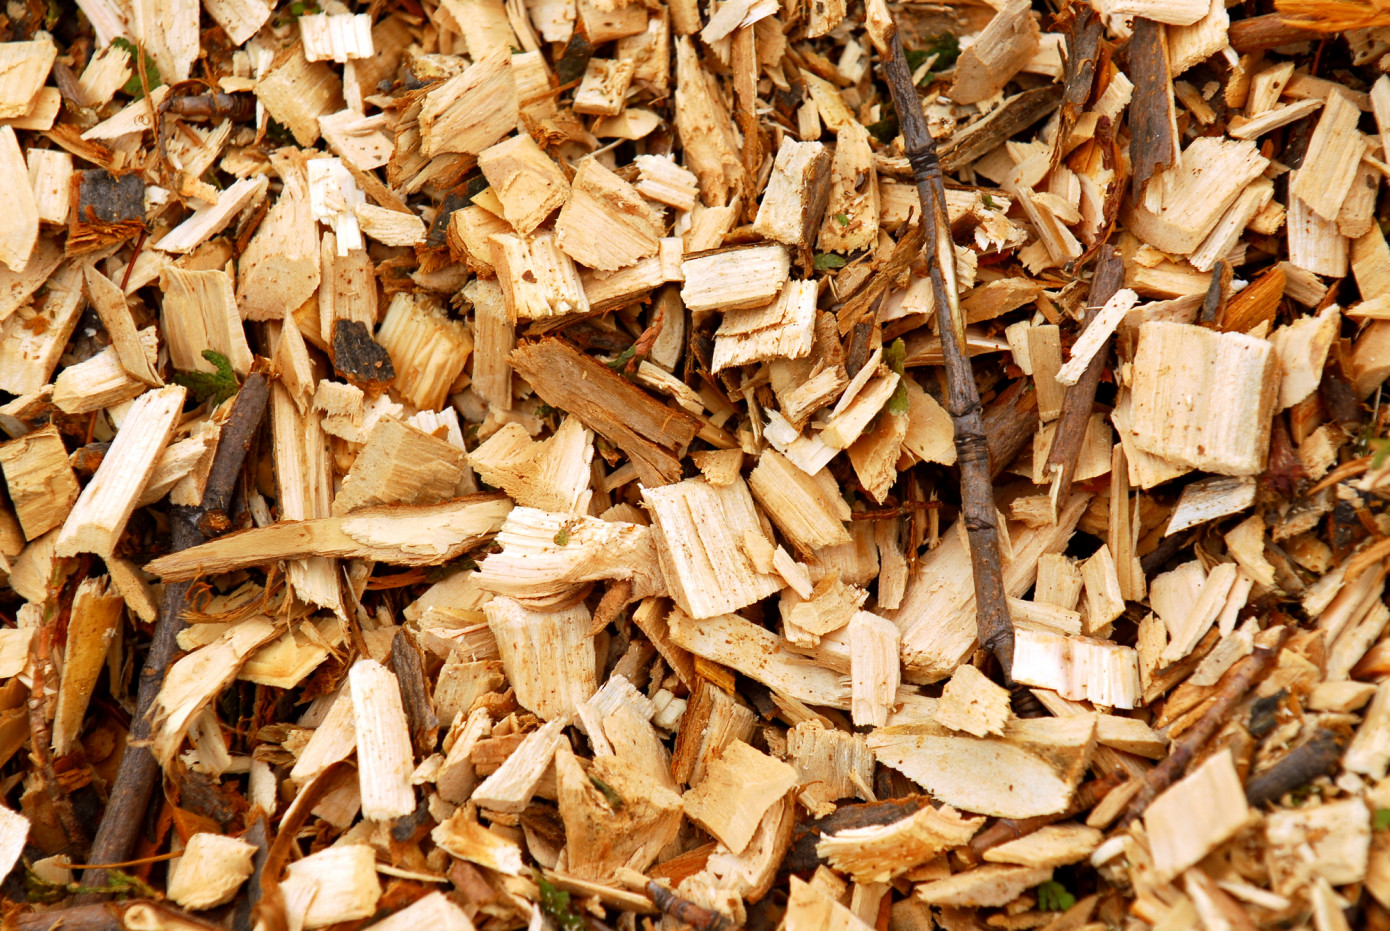 In March, price for wood chips imported to China stays flat